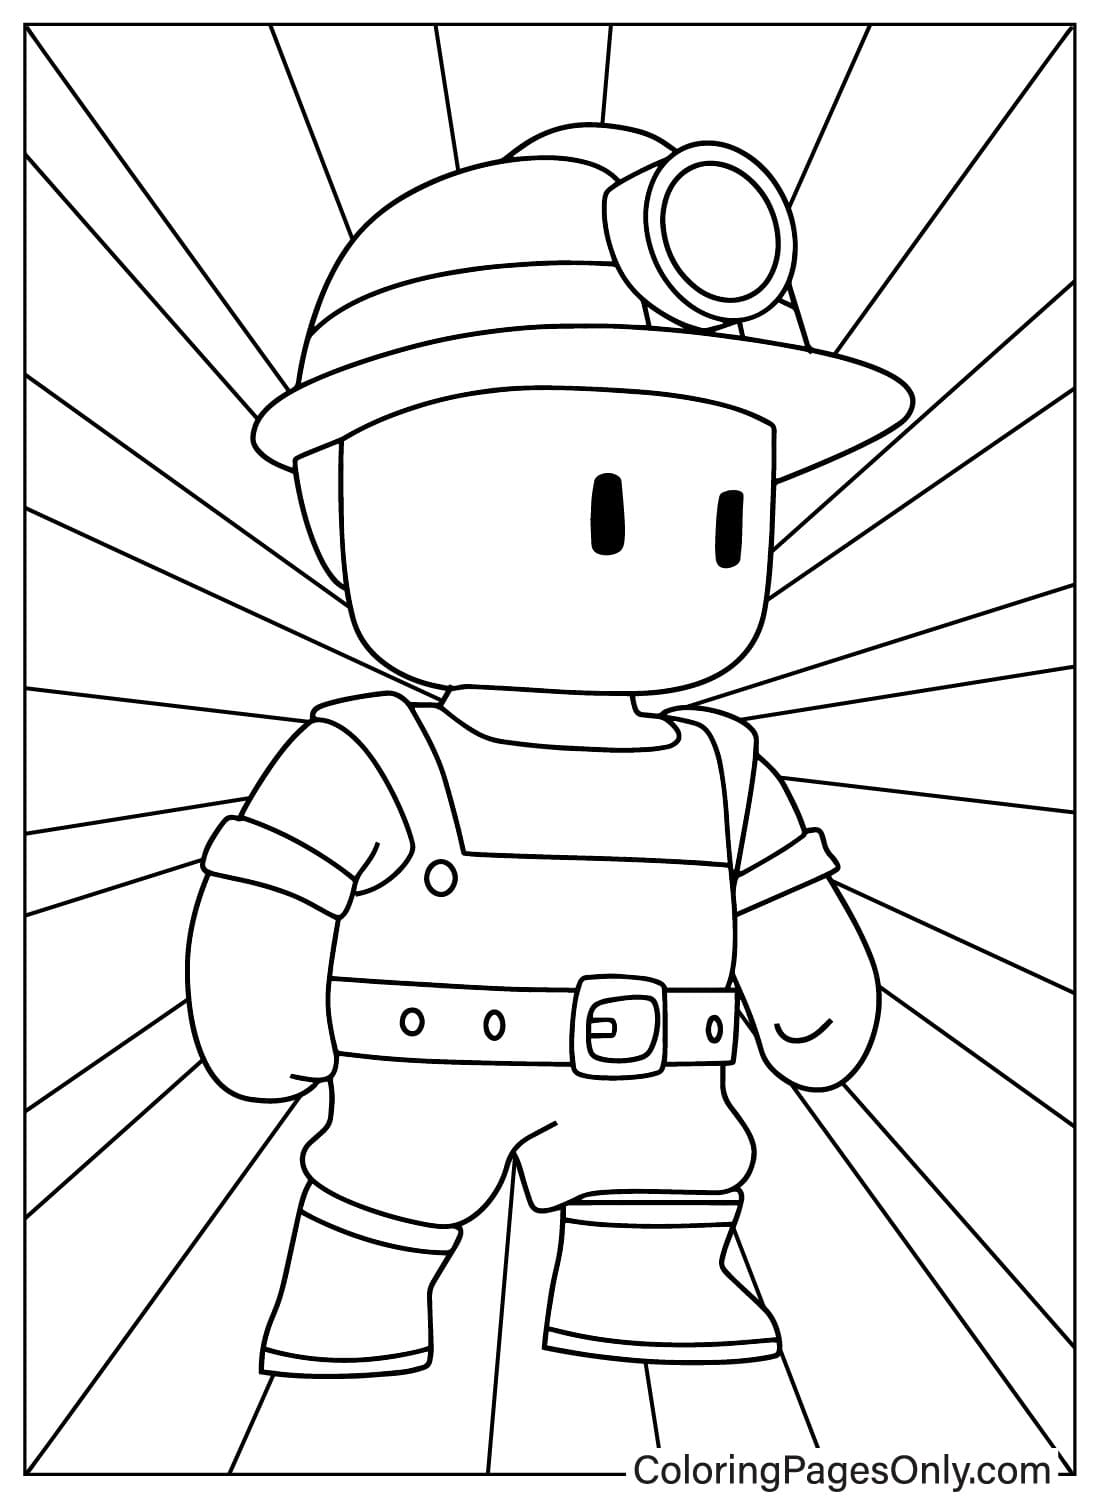 Stumble Guys Free Coloring Page from Stumble Guys